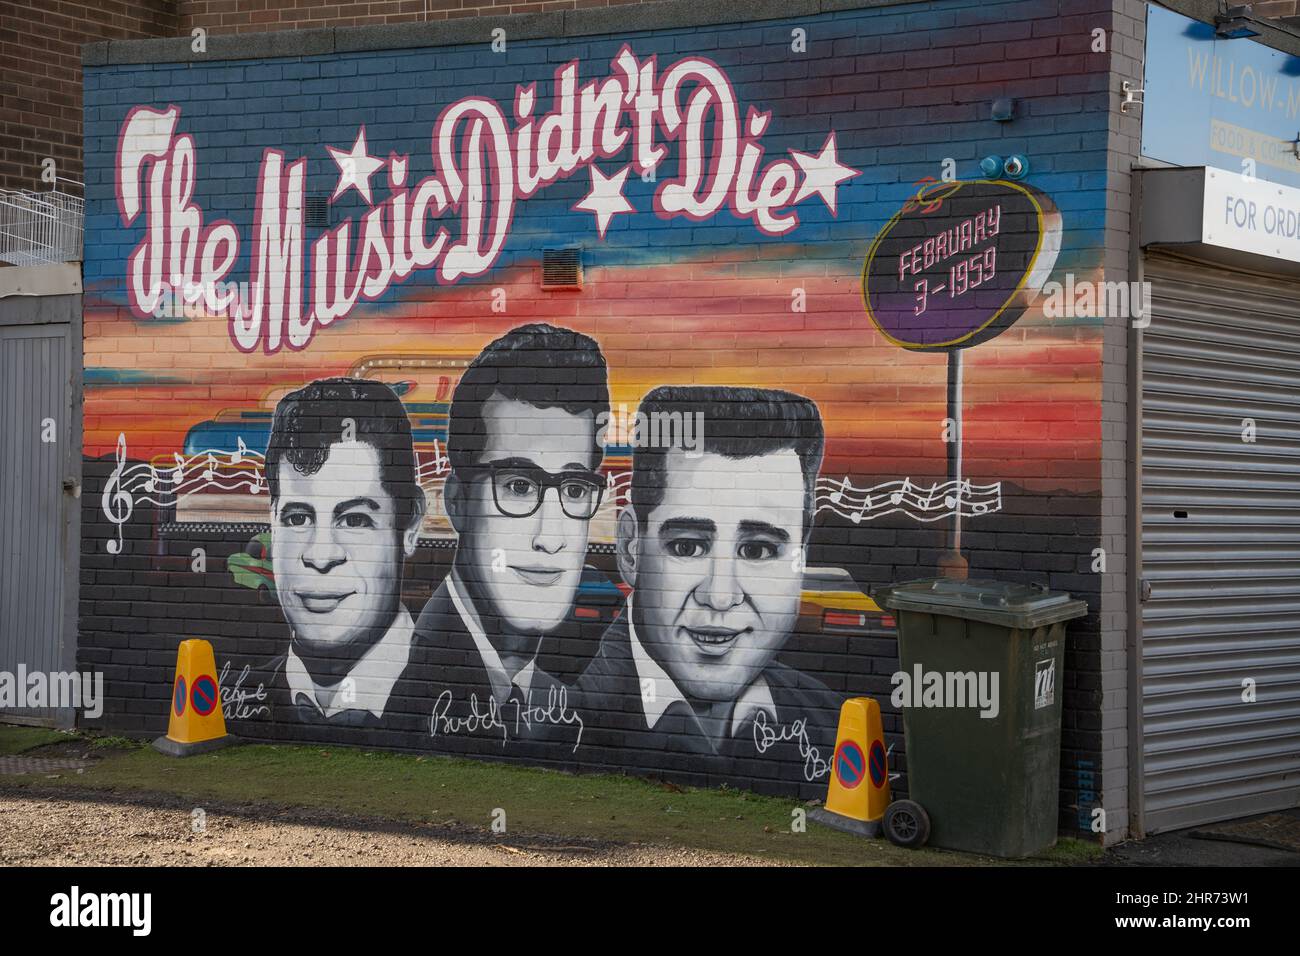 Memorial wall, Longbenton, UK. American rock n' roll musicians Buddy Holly, Ritchie Valens, 'The Big Bopper' J.P. Richardson - died in a plane crash. Stock Photo